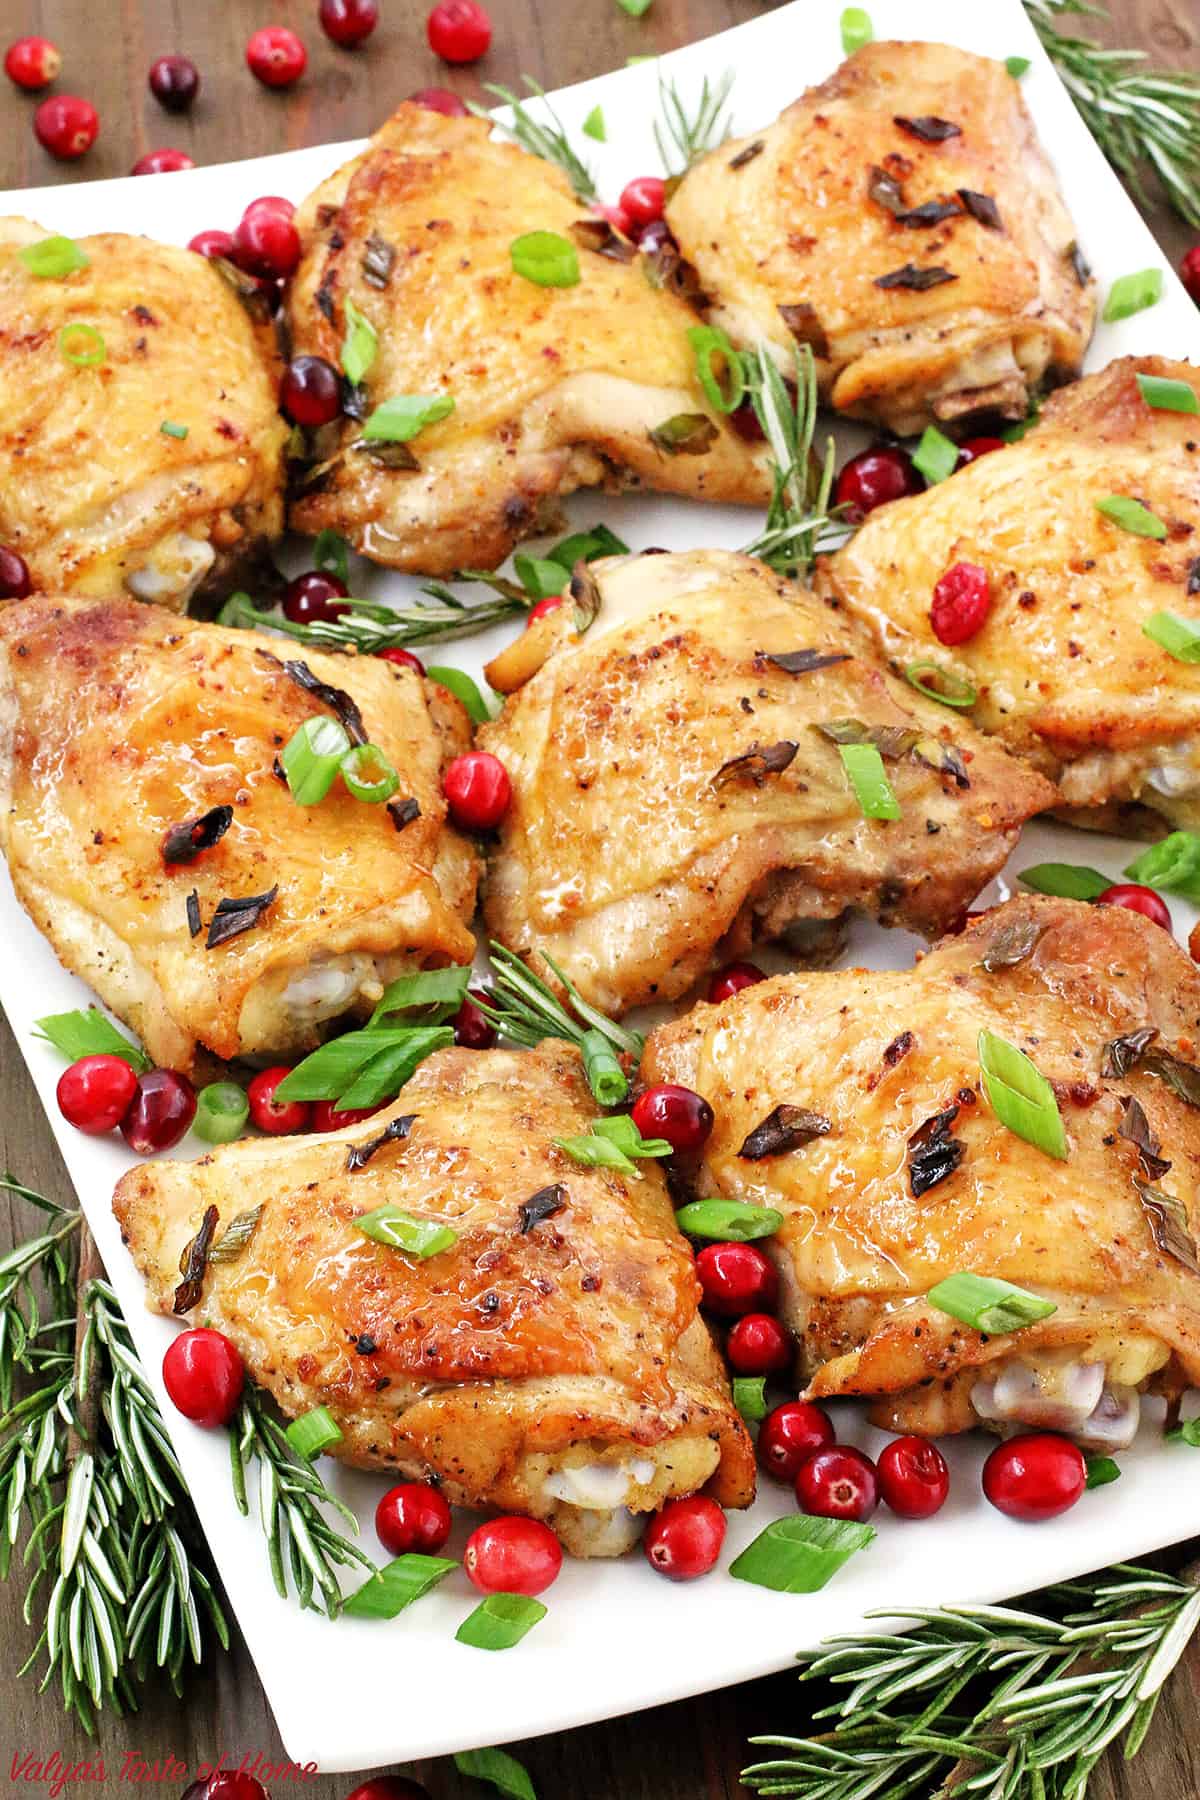 You won’t find a better Christmas dinner recipe on the internet since this chicken recipe is going to not only wow your guests but satisfy their cravings completely!